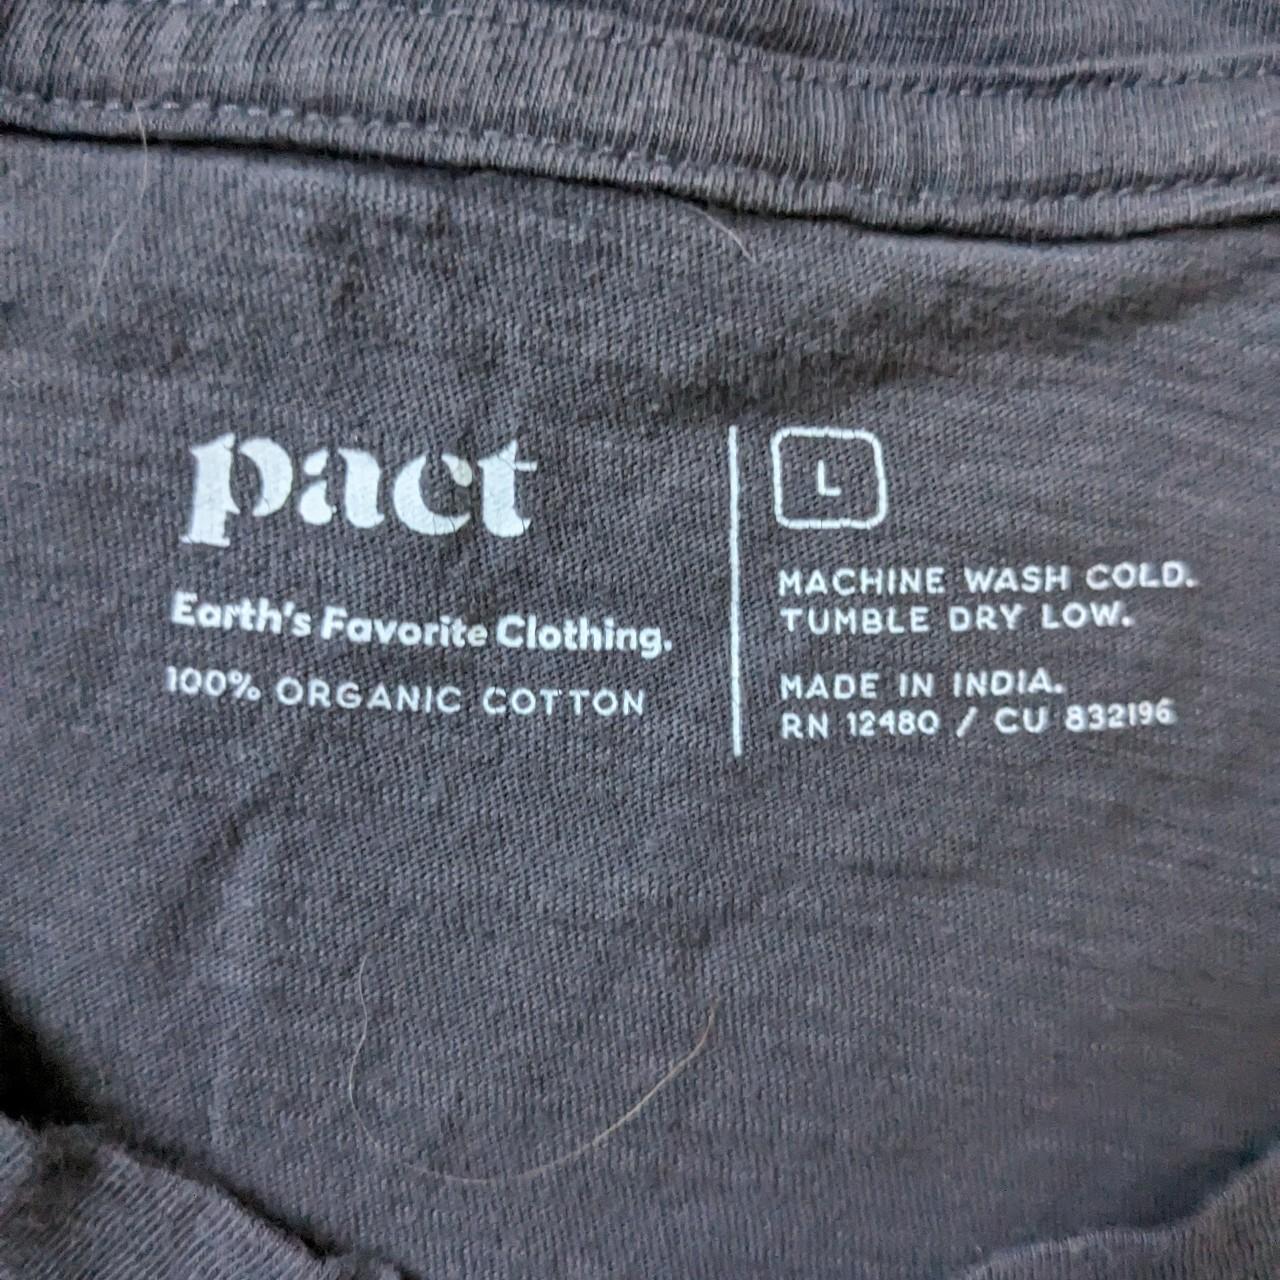 Pact Organic Clothing - Earth's Favorite!